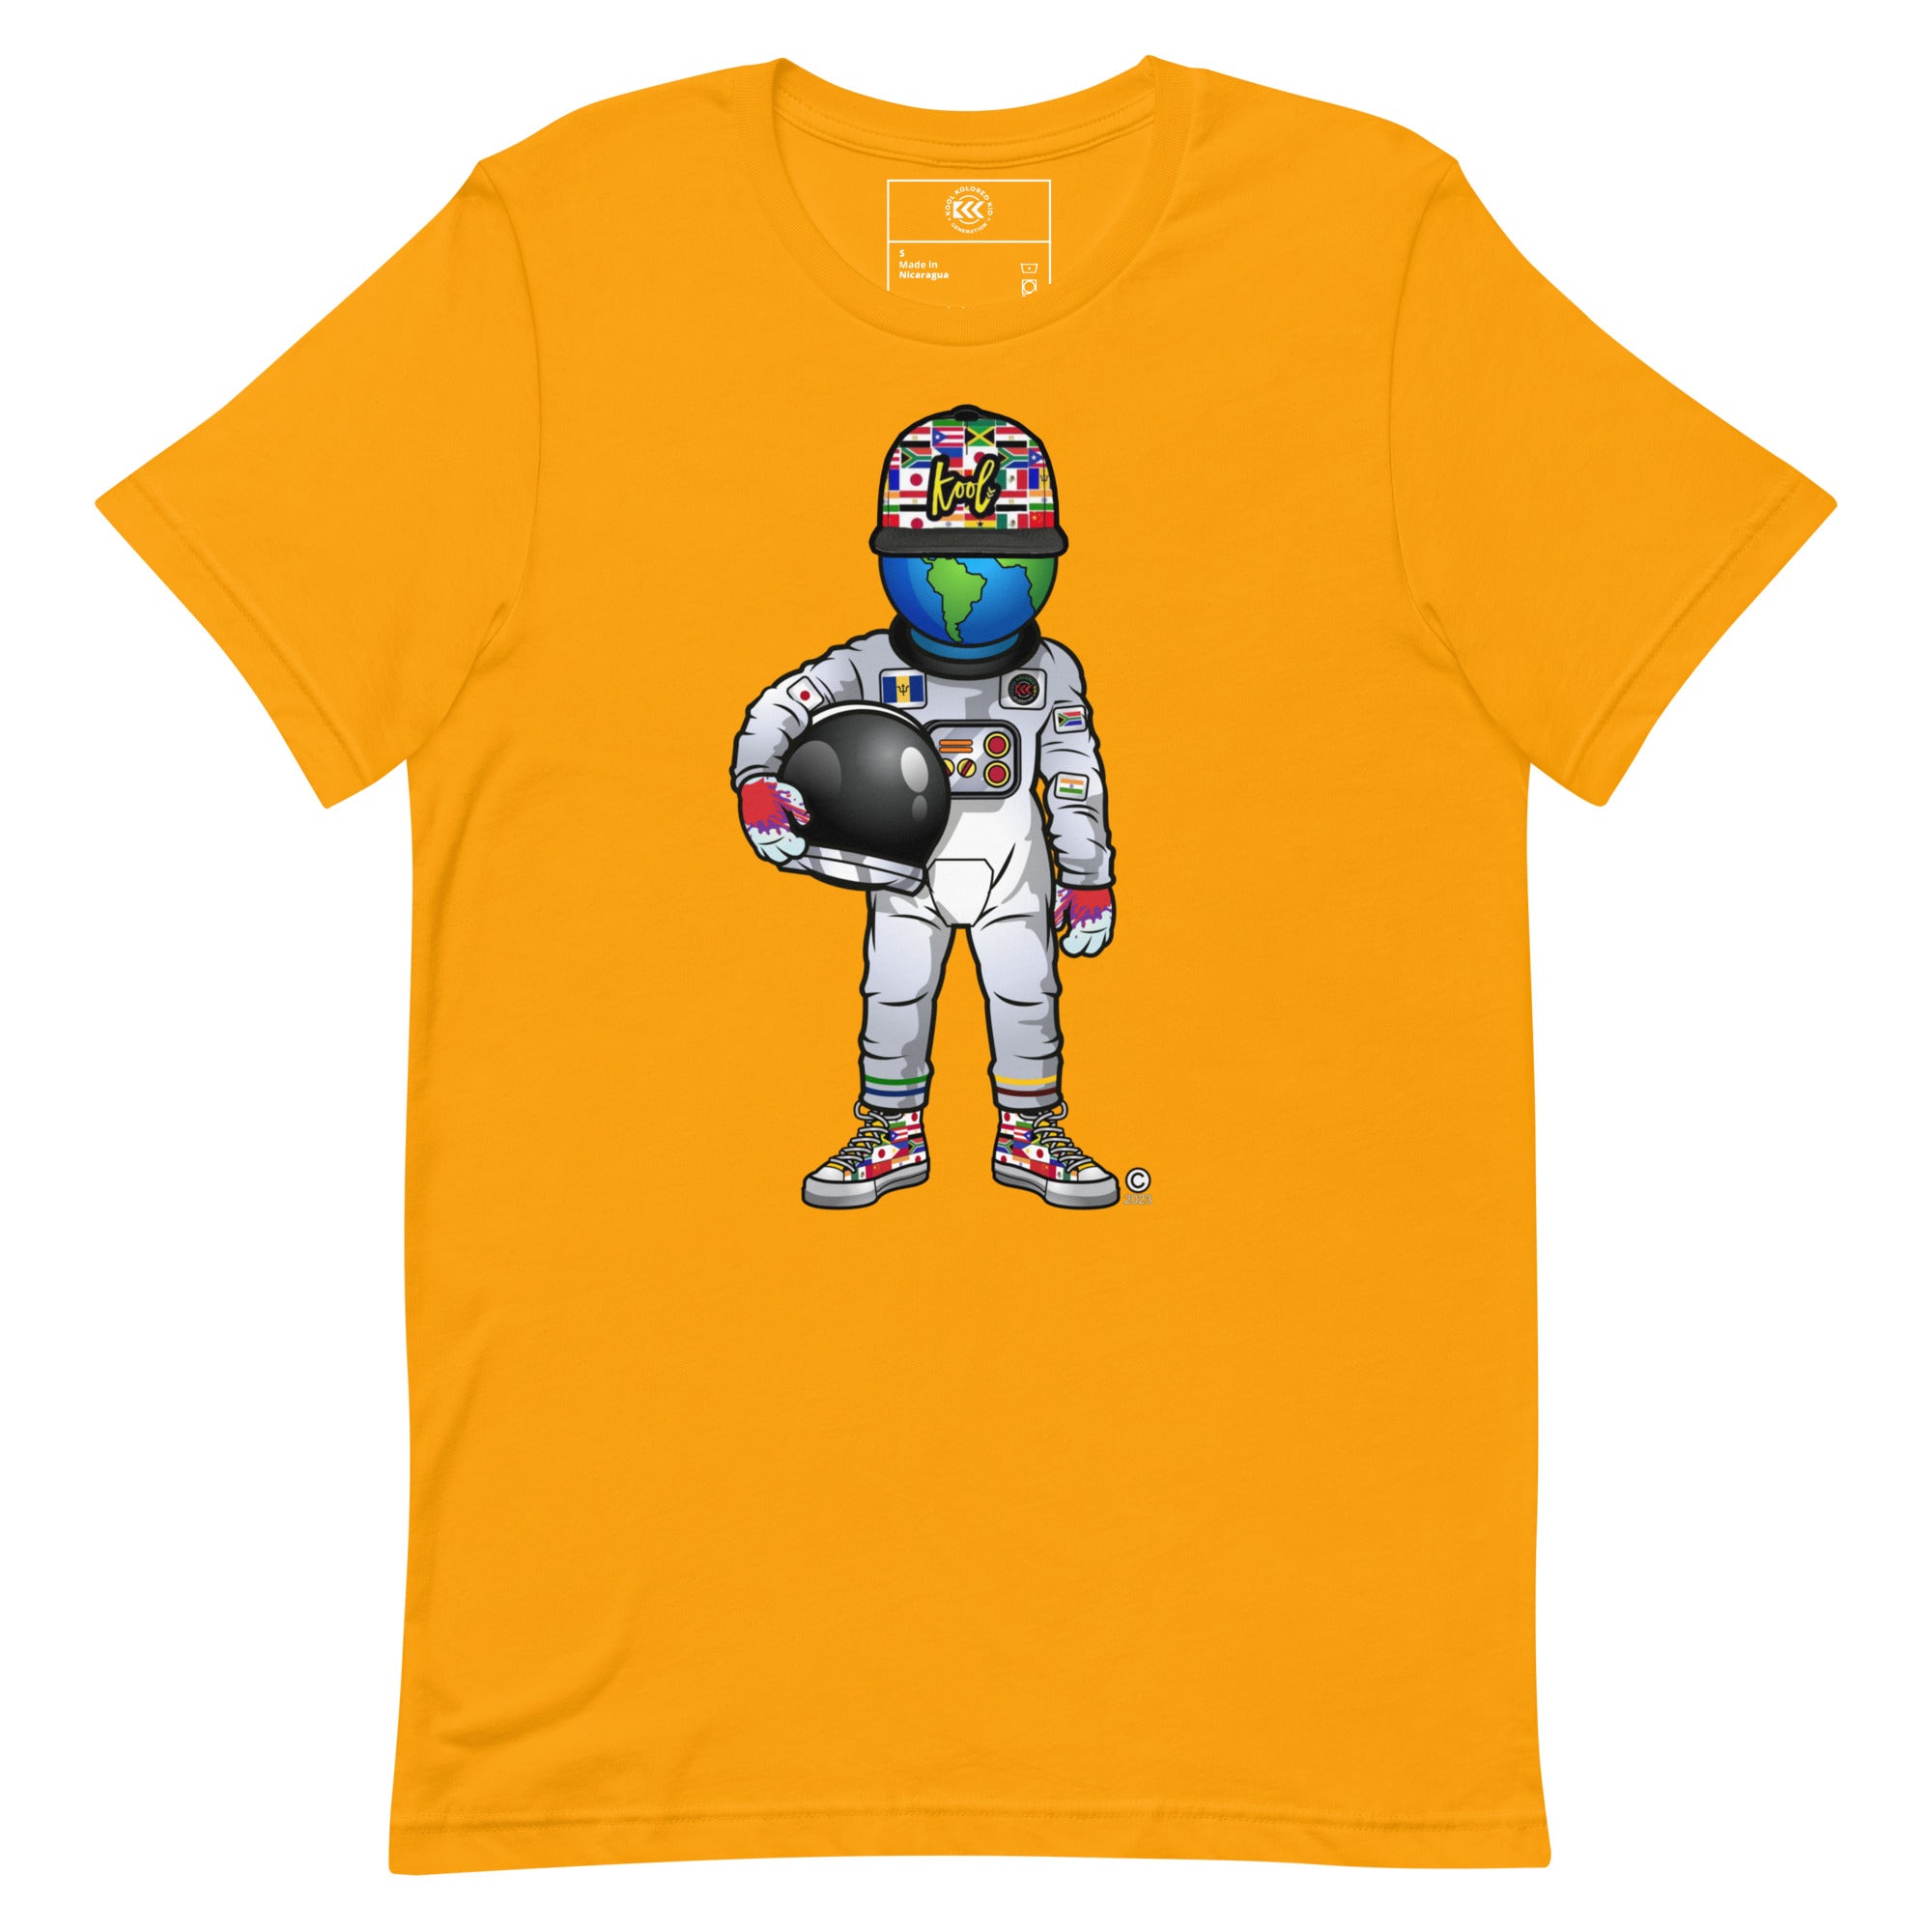 Kool World - Outer Space is the limit Tee